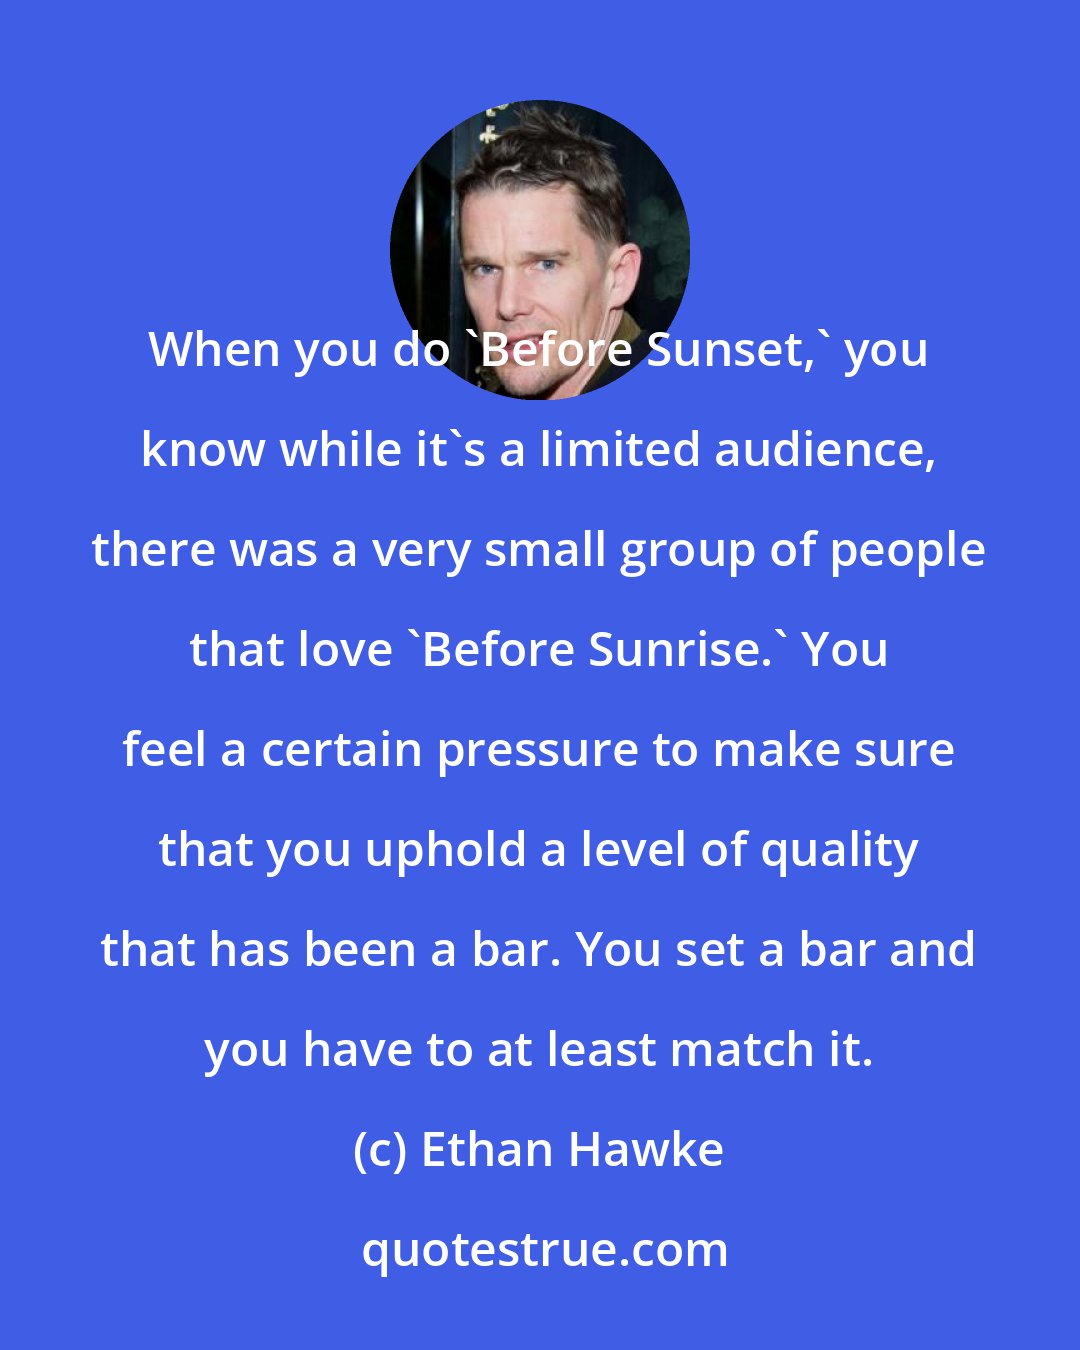 Ethan Hawke: When you do 'Before Sunset,' you know while it's a limited audience, there was a very small group of people that love 'Before Sunrise.' You feel a certain pressure to make sure that you uphold a level of quality that has been a bar. You set a bar and you have to at least match it.